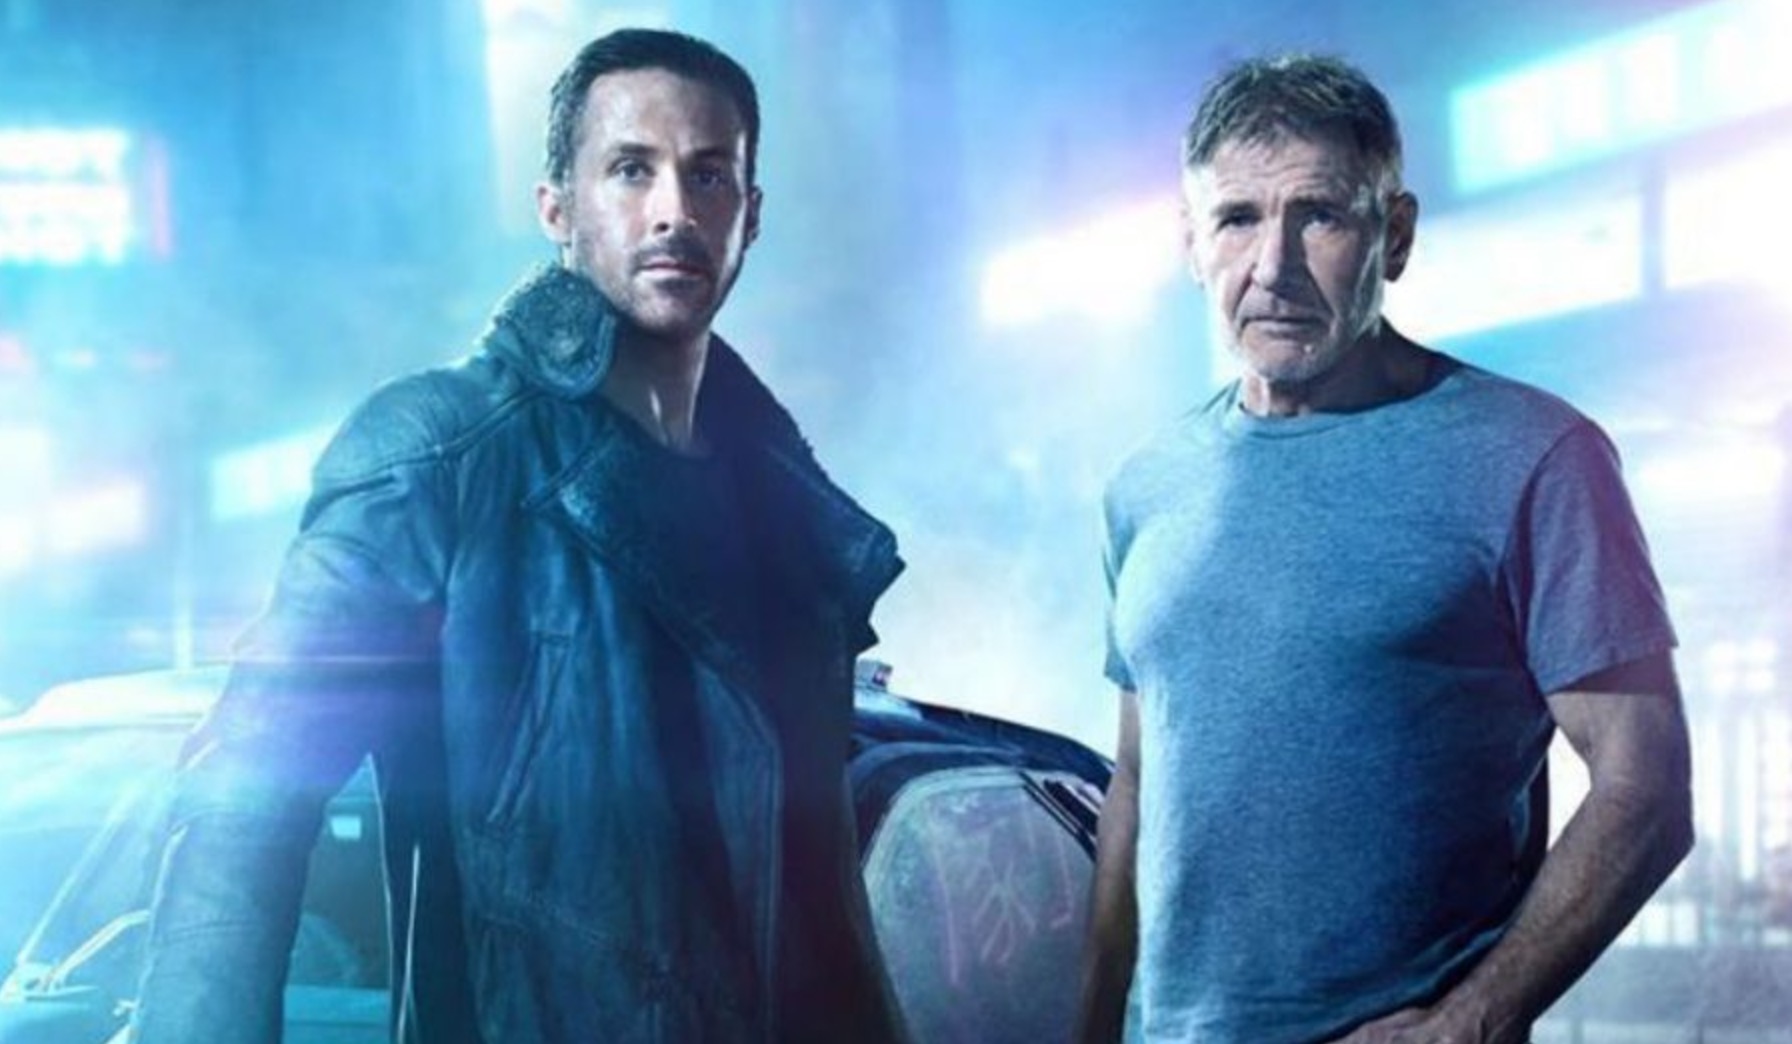 We Made Two People Watch Blade Runner for The First Time, And Here’s What They Thought